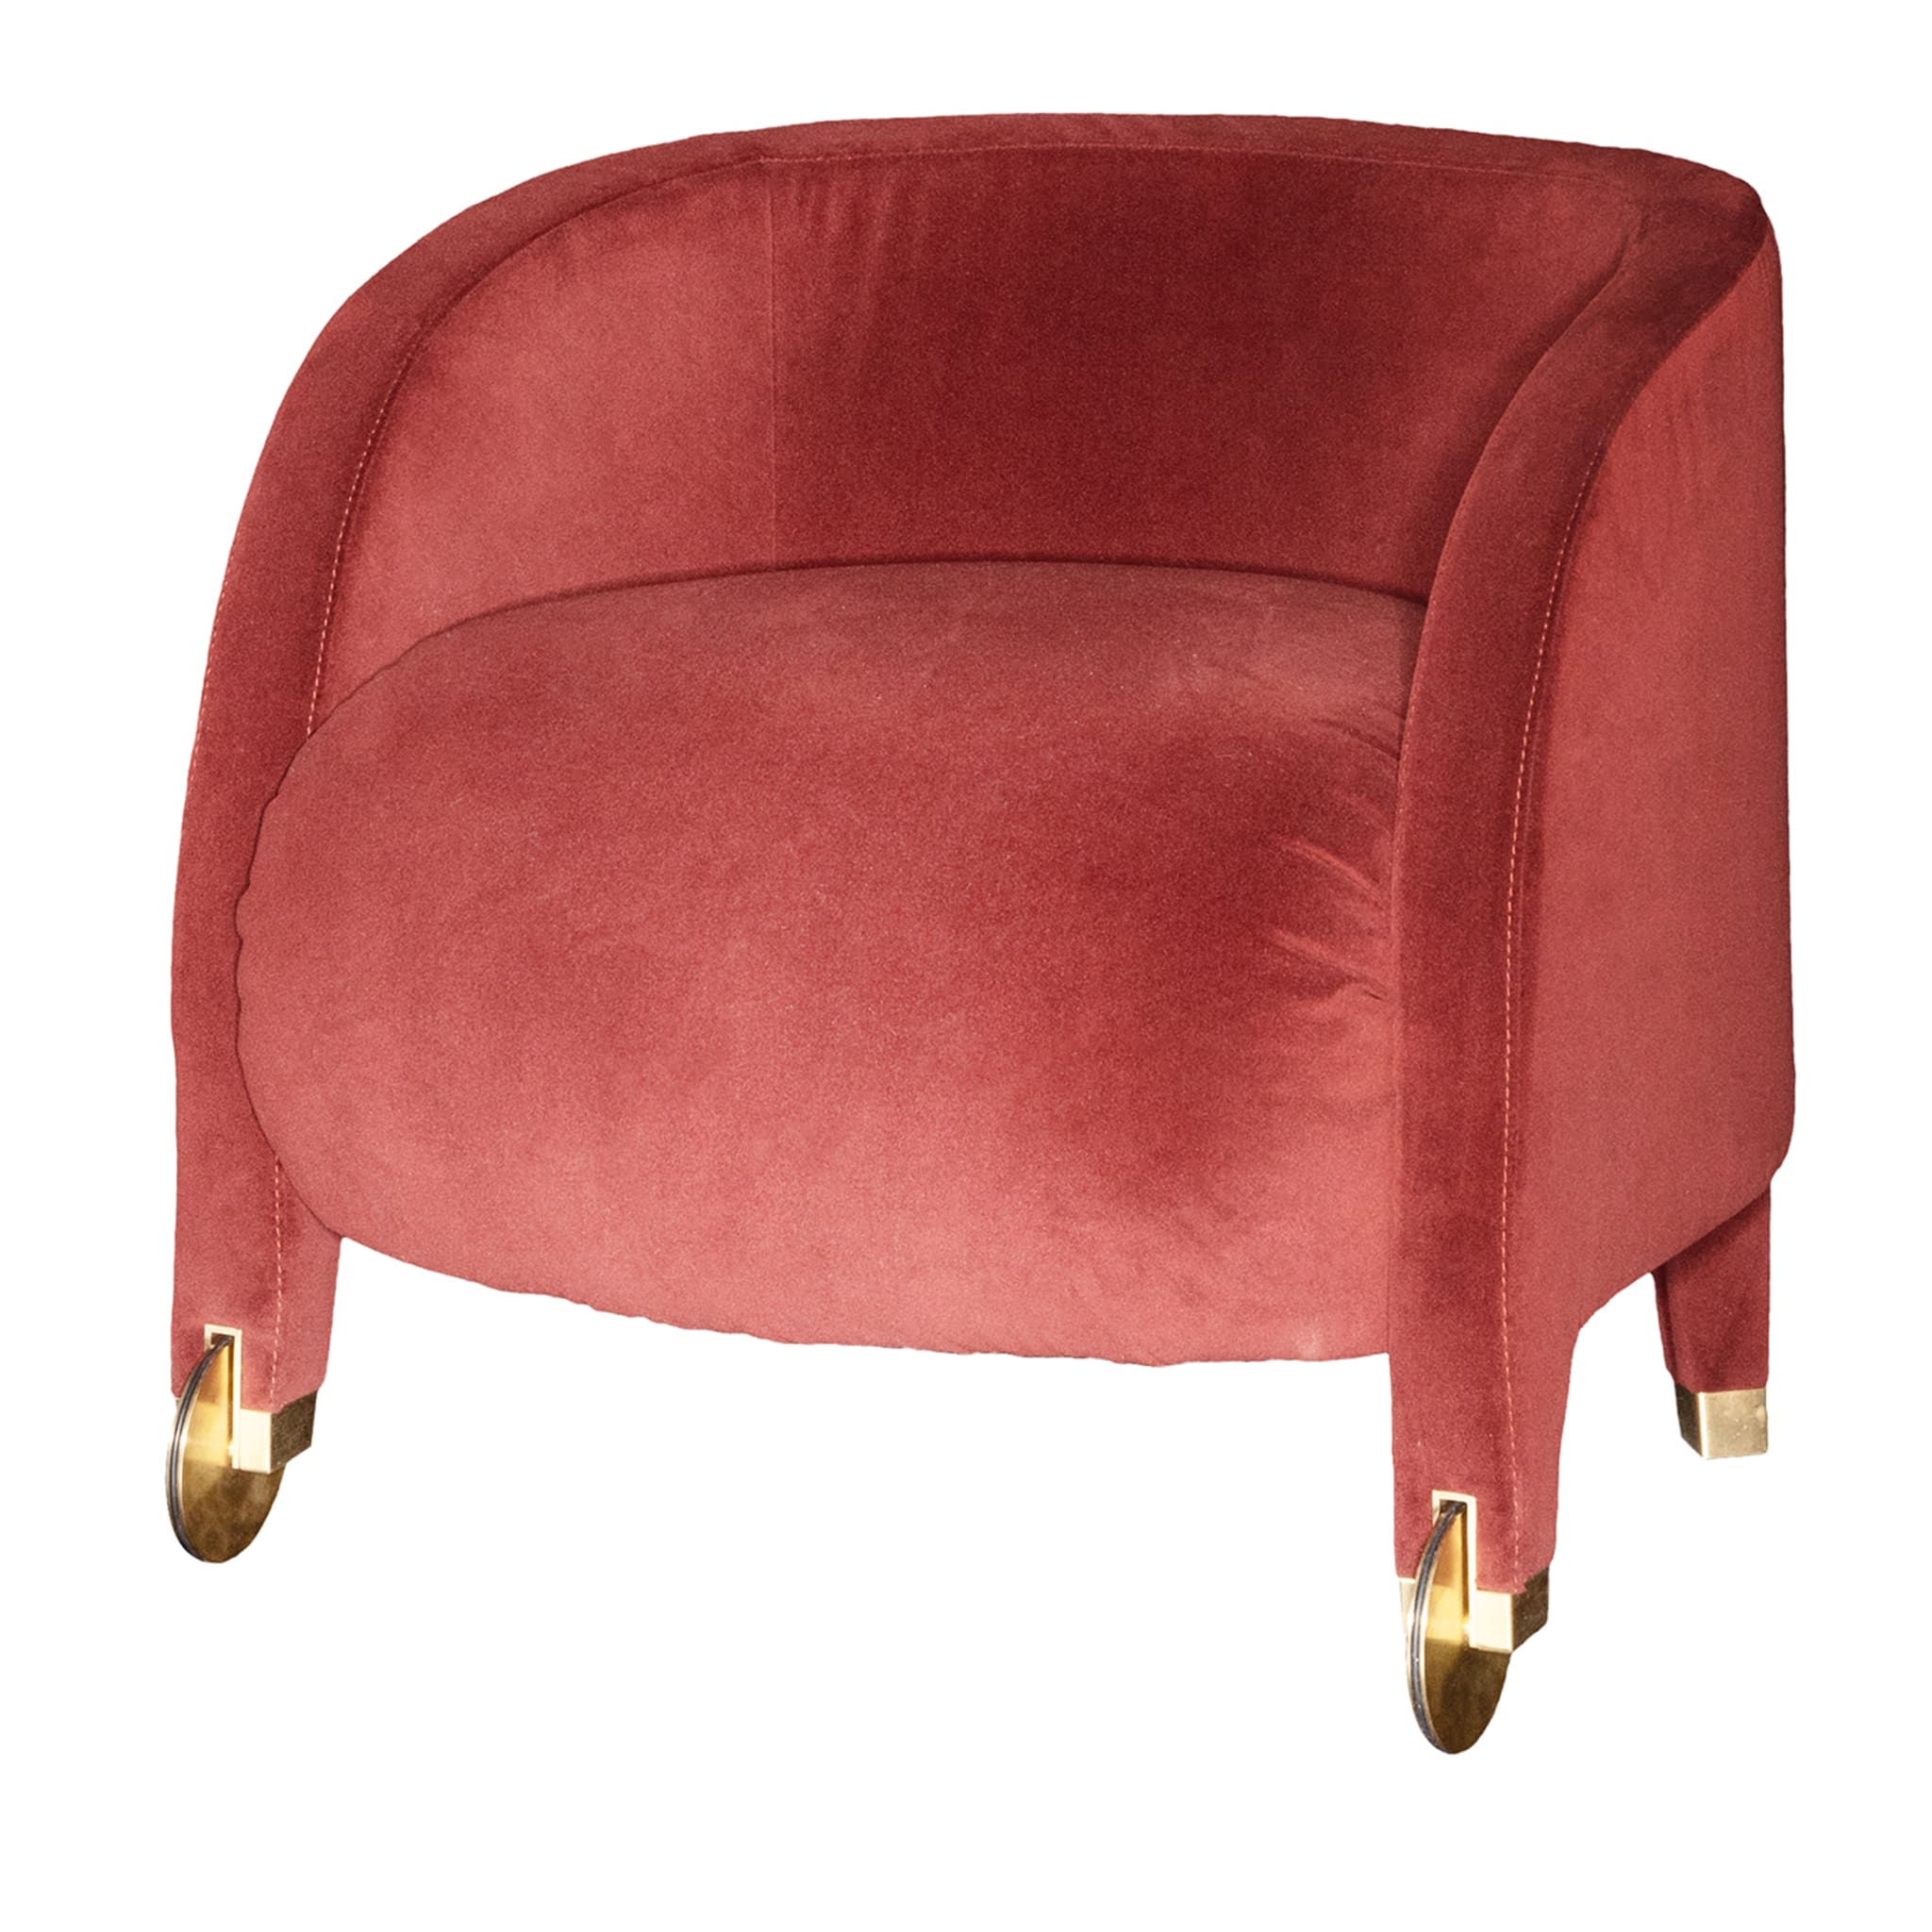 Adele Red Armchair by Dainelli Studio - Main view